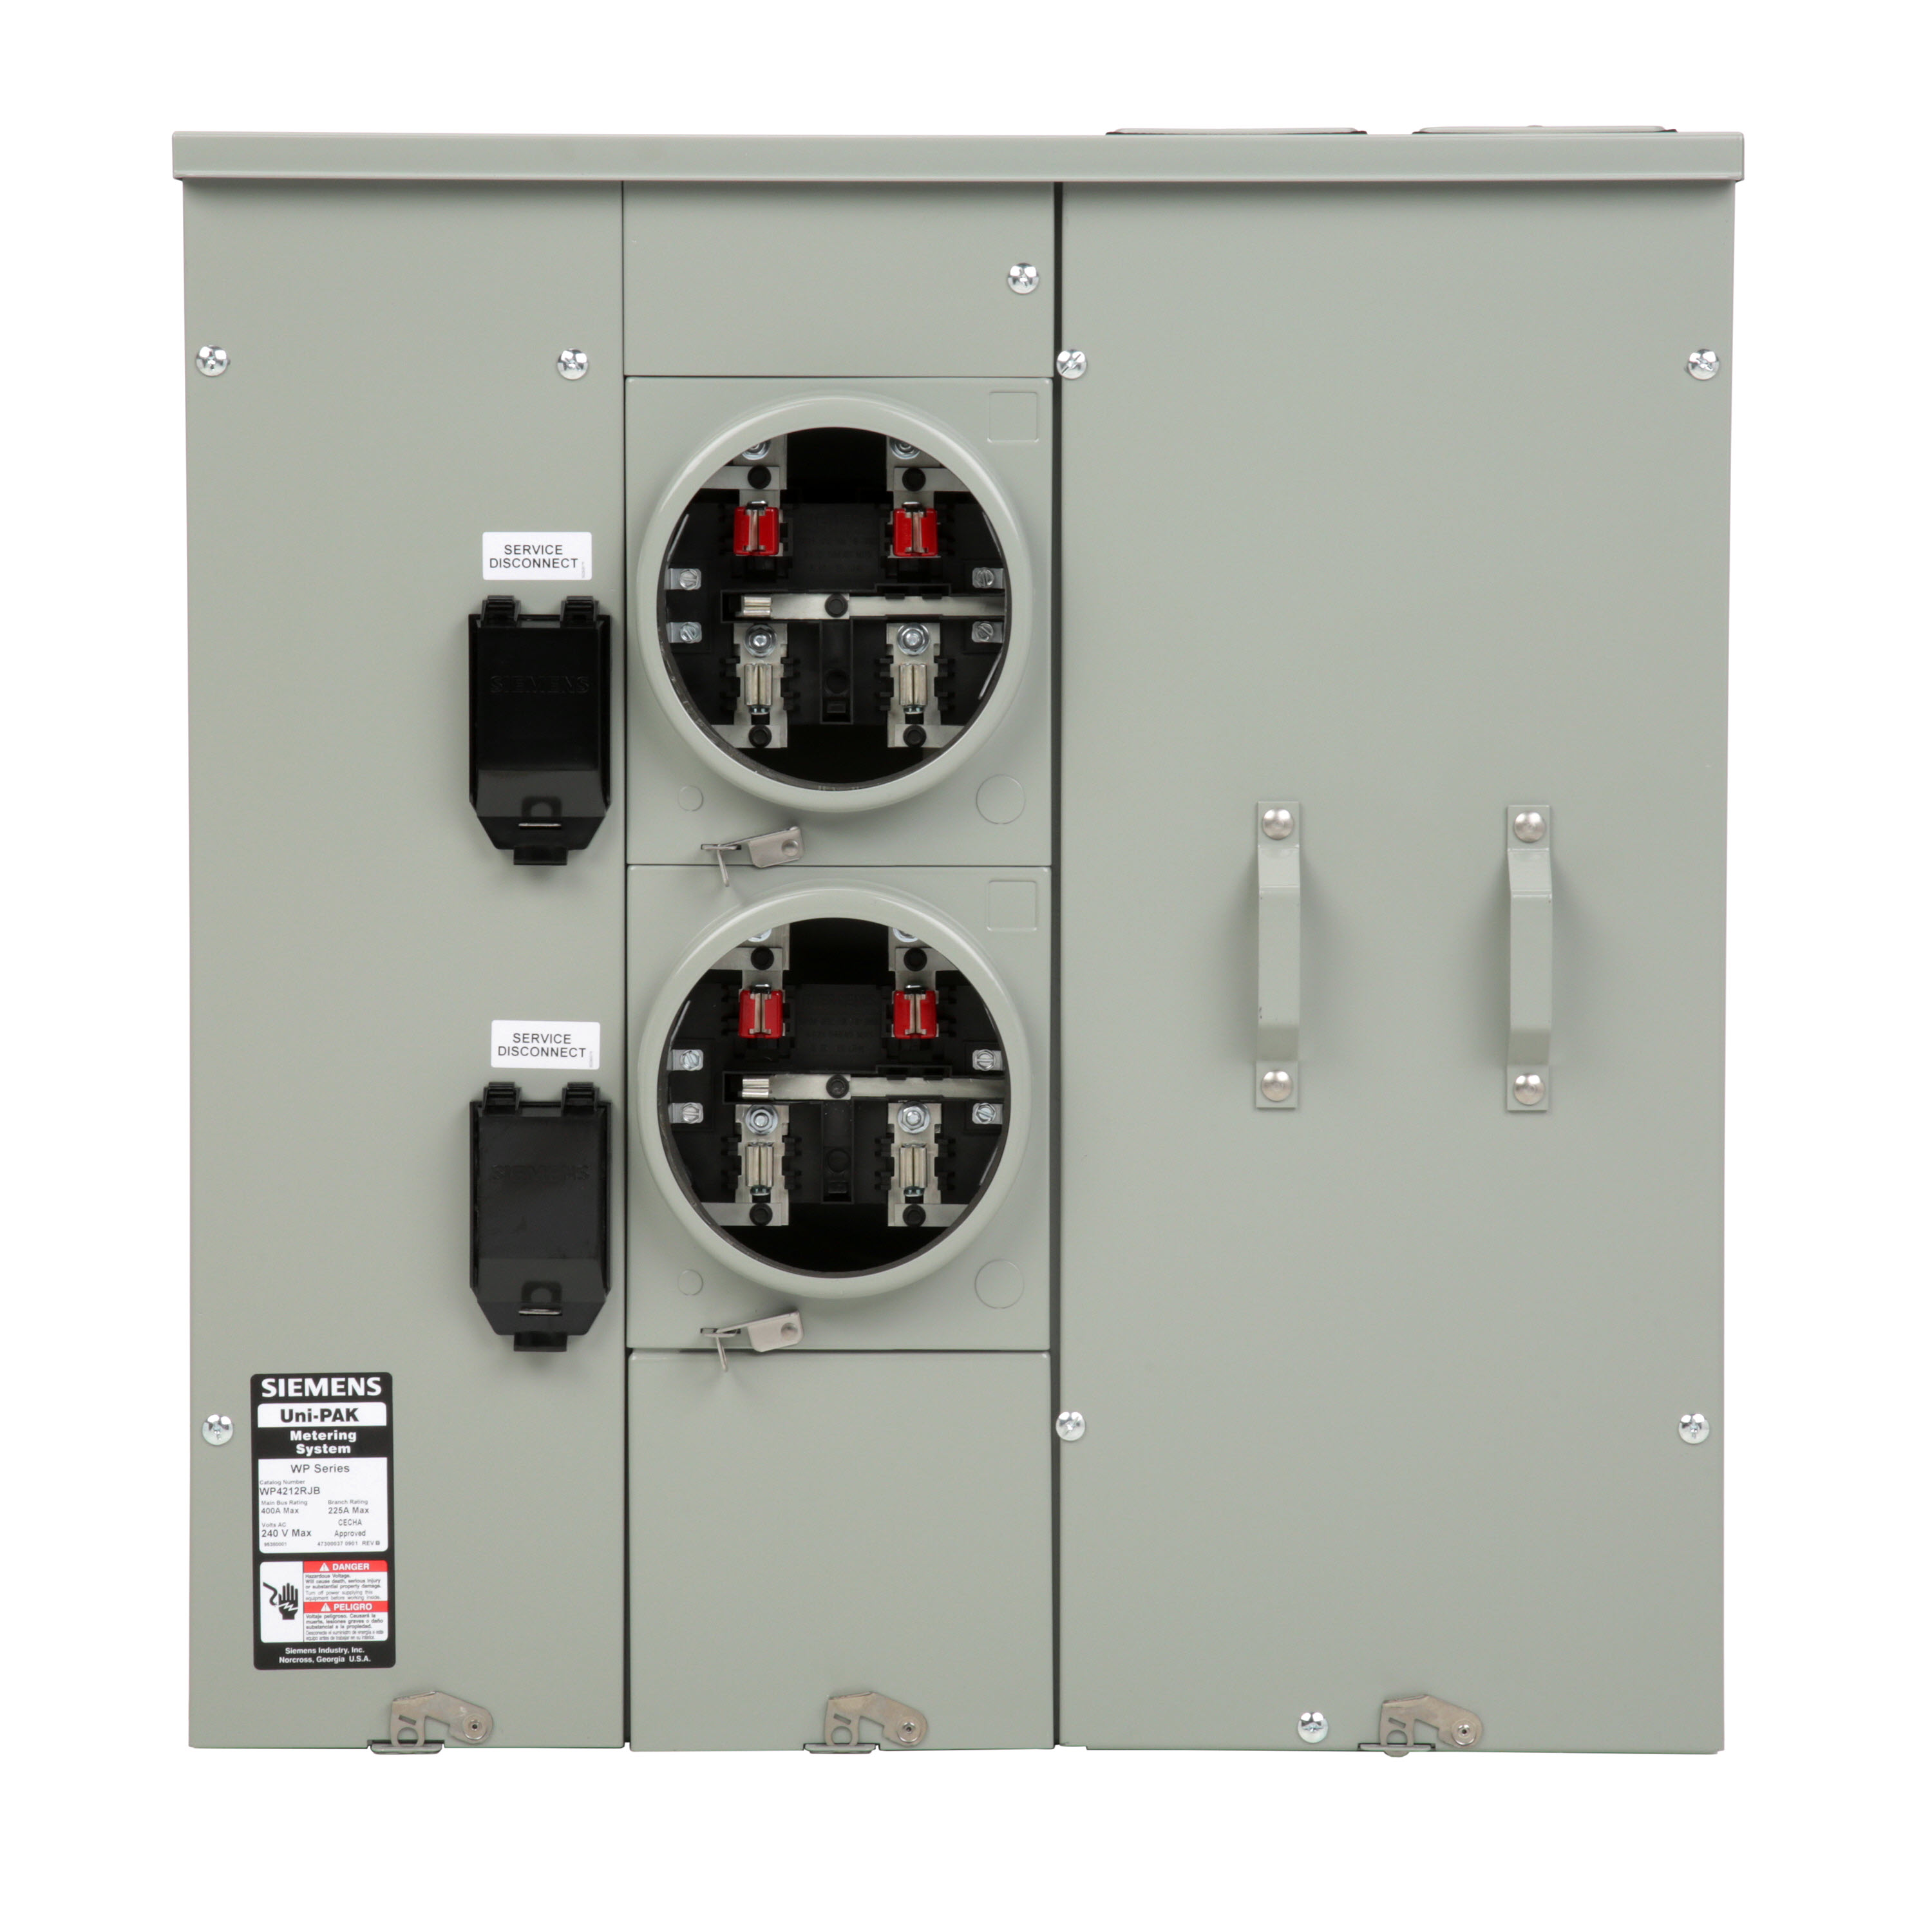 Siemens Low Voltage s Multi-Family Metering Line of PAK Metering Standard 225A as part of the PAK Metering Standard 225A Group. Type UNI-PAK Features HORN BYPASS Appn GARDEN - STYLE Std UL-50,67,414 V. Rating 120/240V A. Rating 400A Phase 1PH Size 9.00 x 28.79 x 30.630 No. Of Cutouts 11 Cutout Size 1 x (1/2,3/4,1,1-1/4 ), 6 x (2-1/2,2 ,1-1/2,1-1/4,1 ), 2 x (4,3-1/2,3,2-1/2,2 ), 2X4 Cable Entry TOP OR BOTTOM FEED Terminal 3X2 STUDS. Insulated.Appn . Wall Mounted. Enclosure RINGLESS